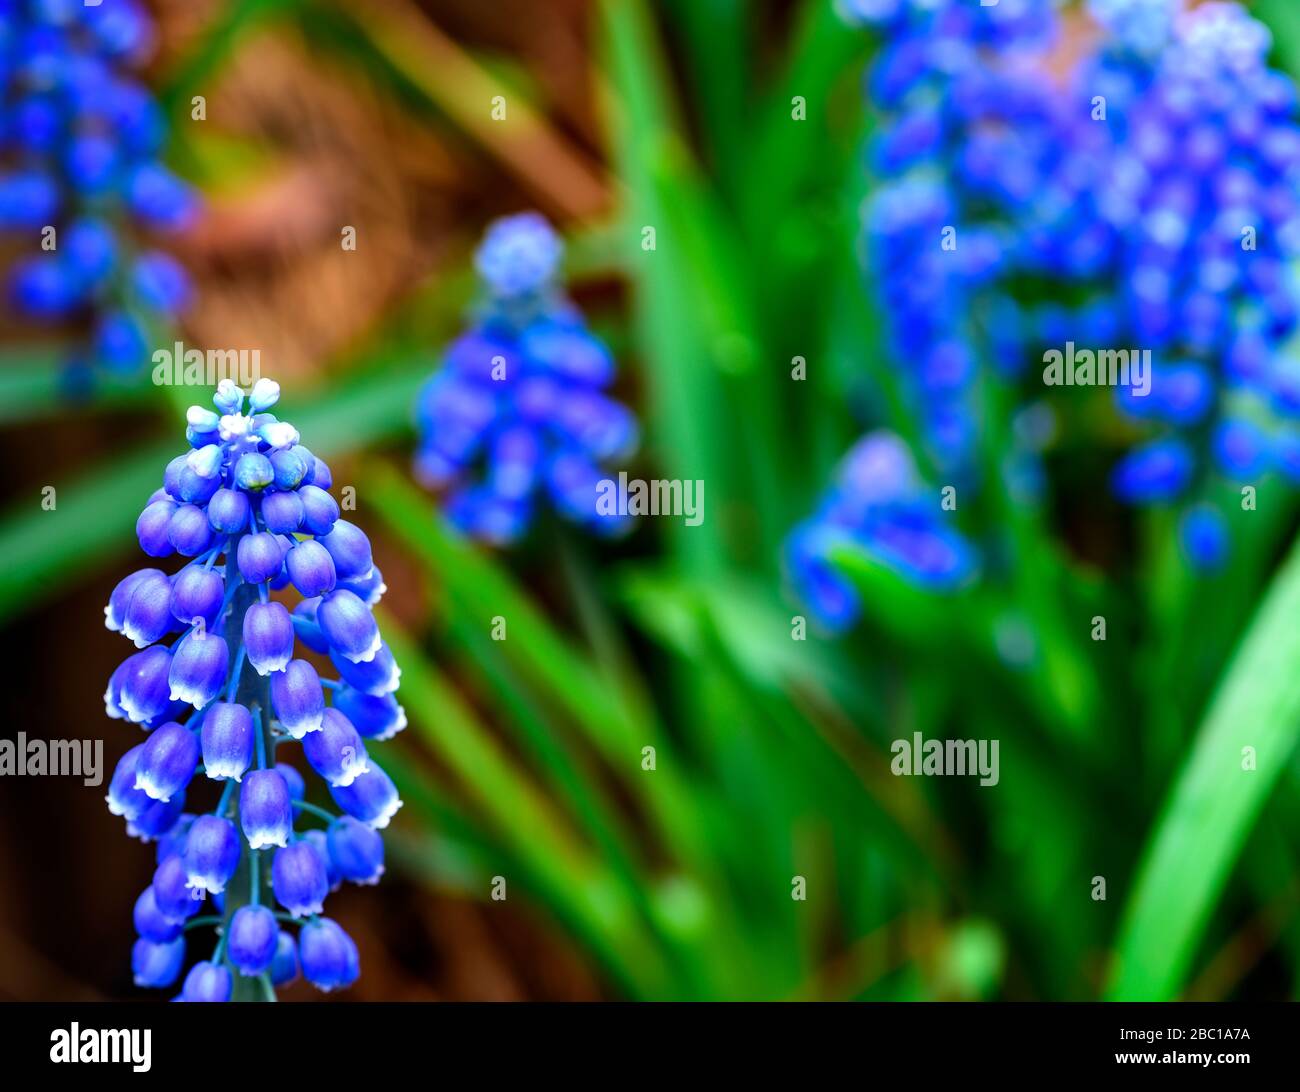 Spring time cluster of Muscari flowers with purple bell-shaped flowers and green stems Stock Photo